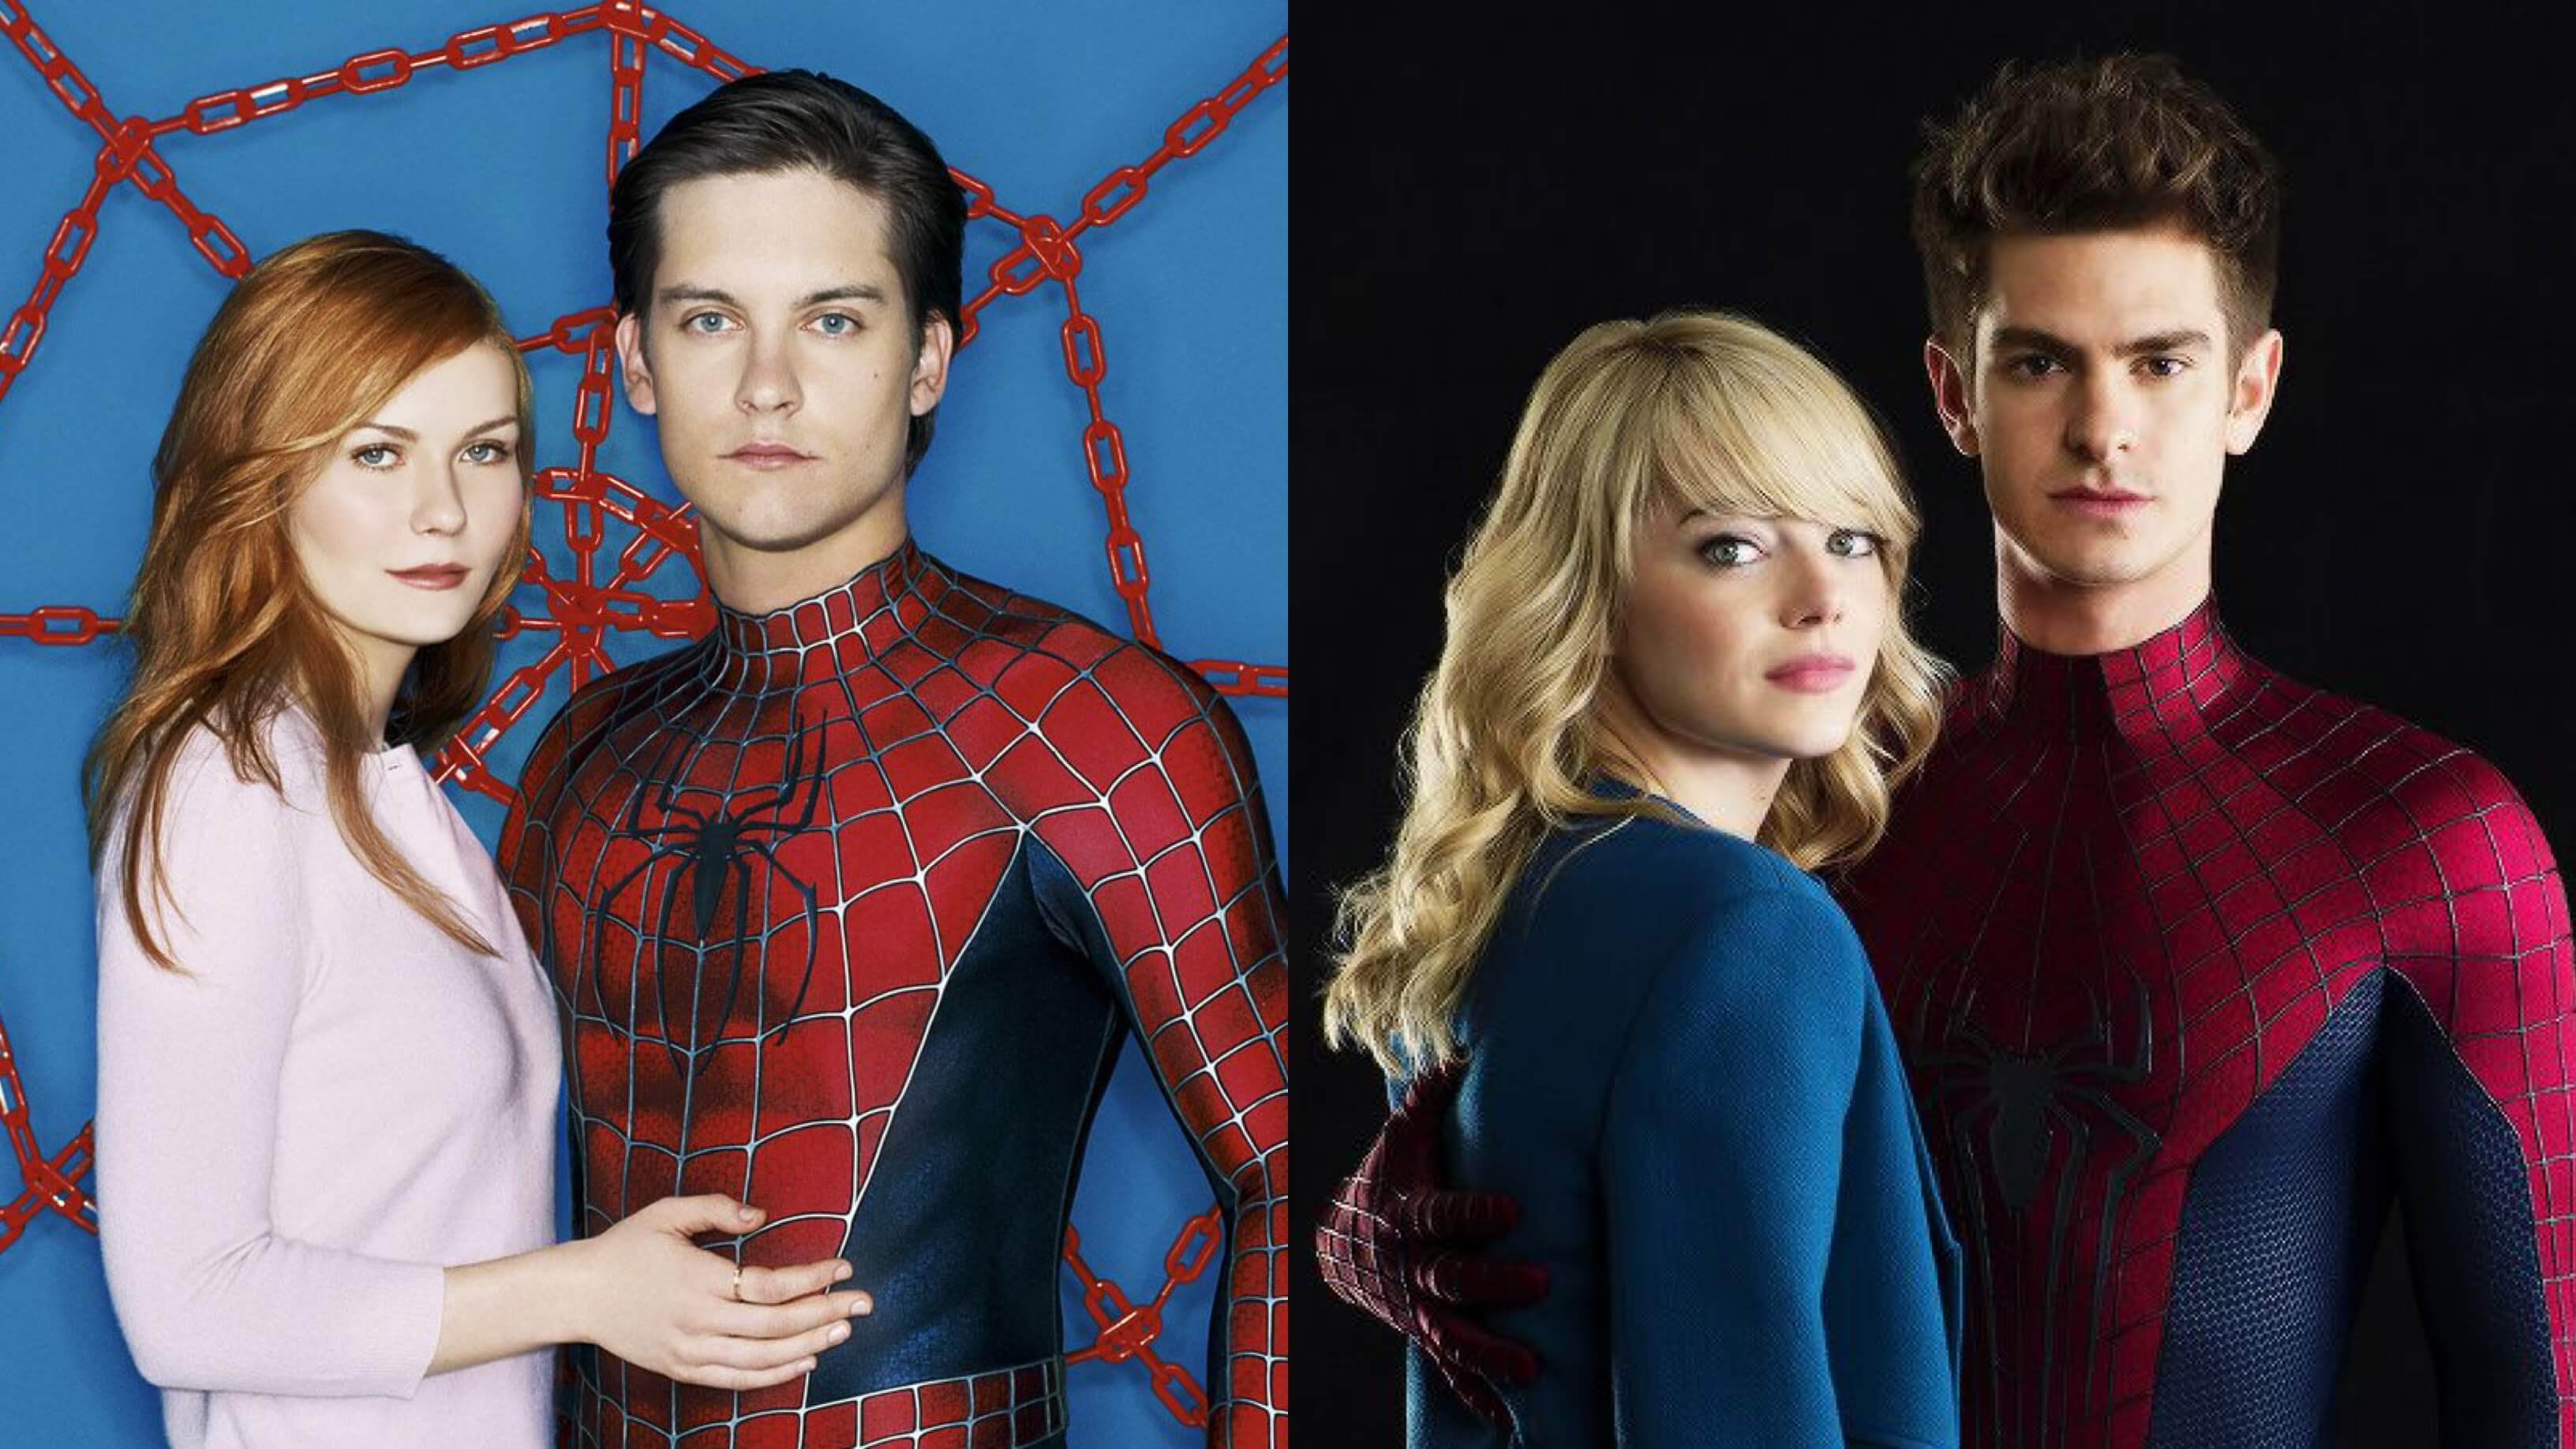 Andrew Garfield And Kirsten Dunst Are Set For 'SpiderMan 3'; Tobey